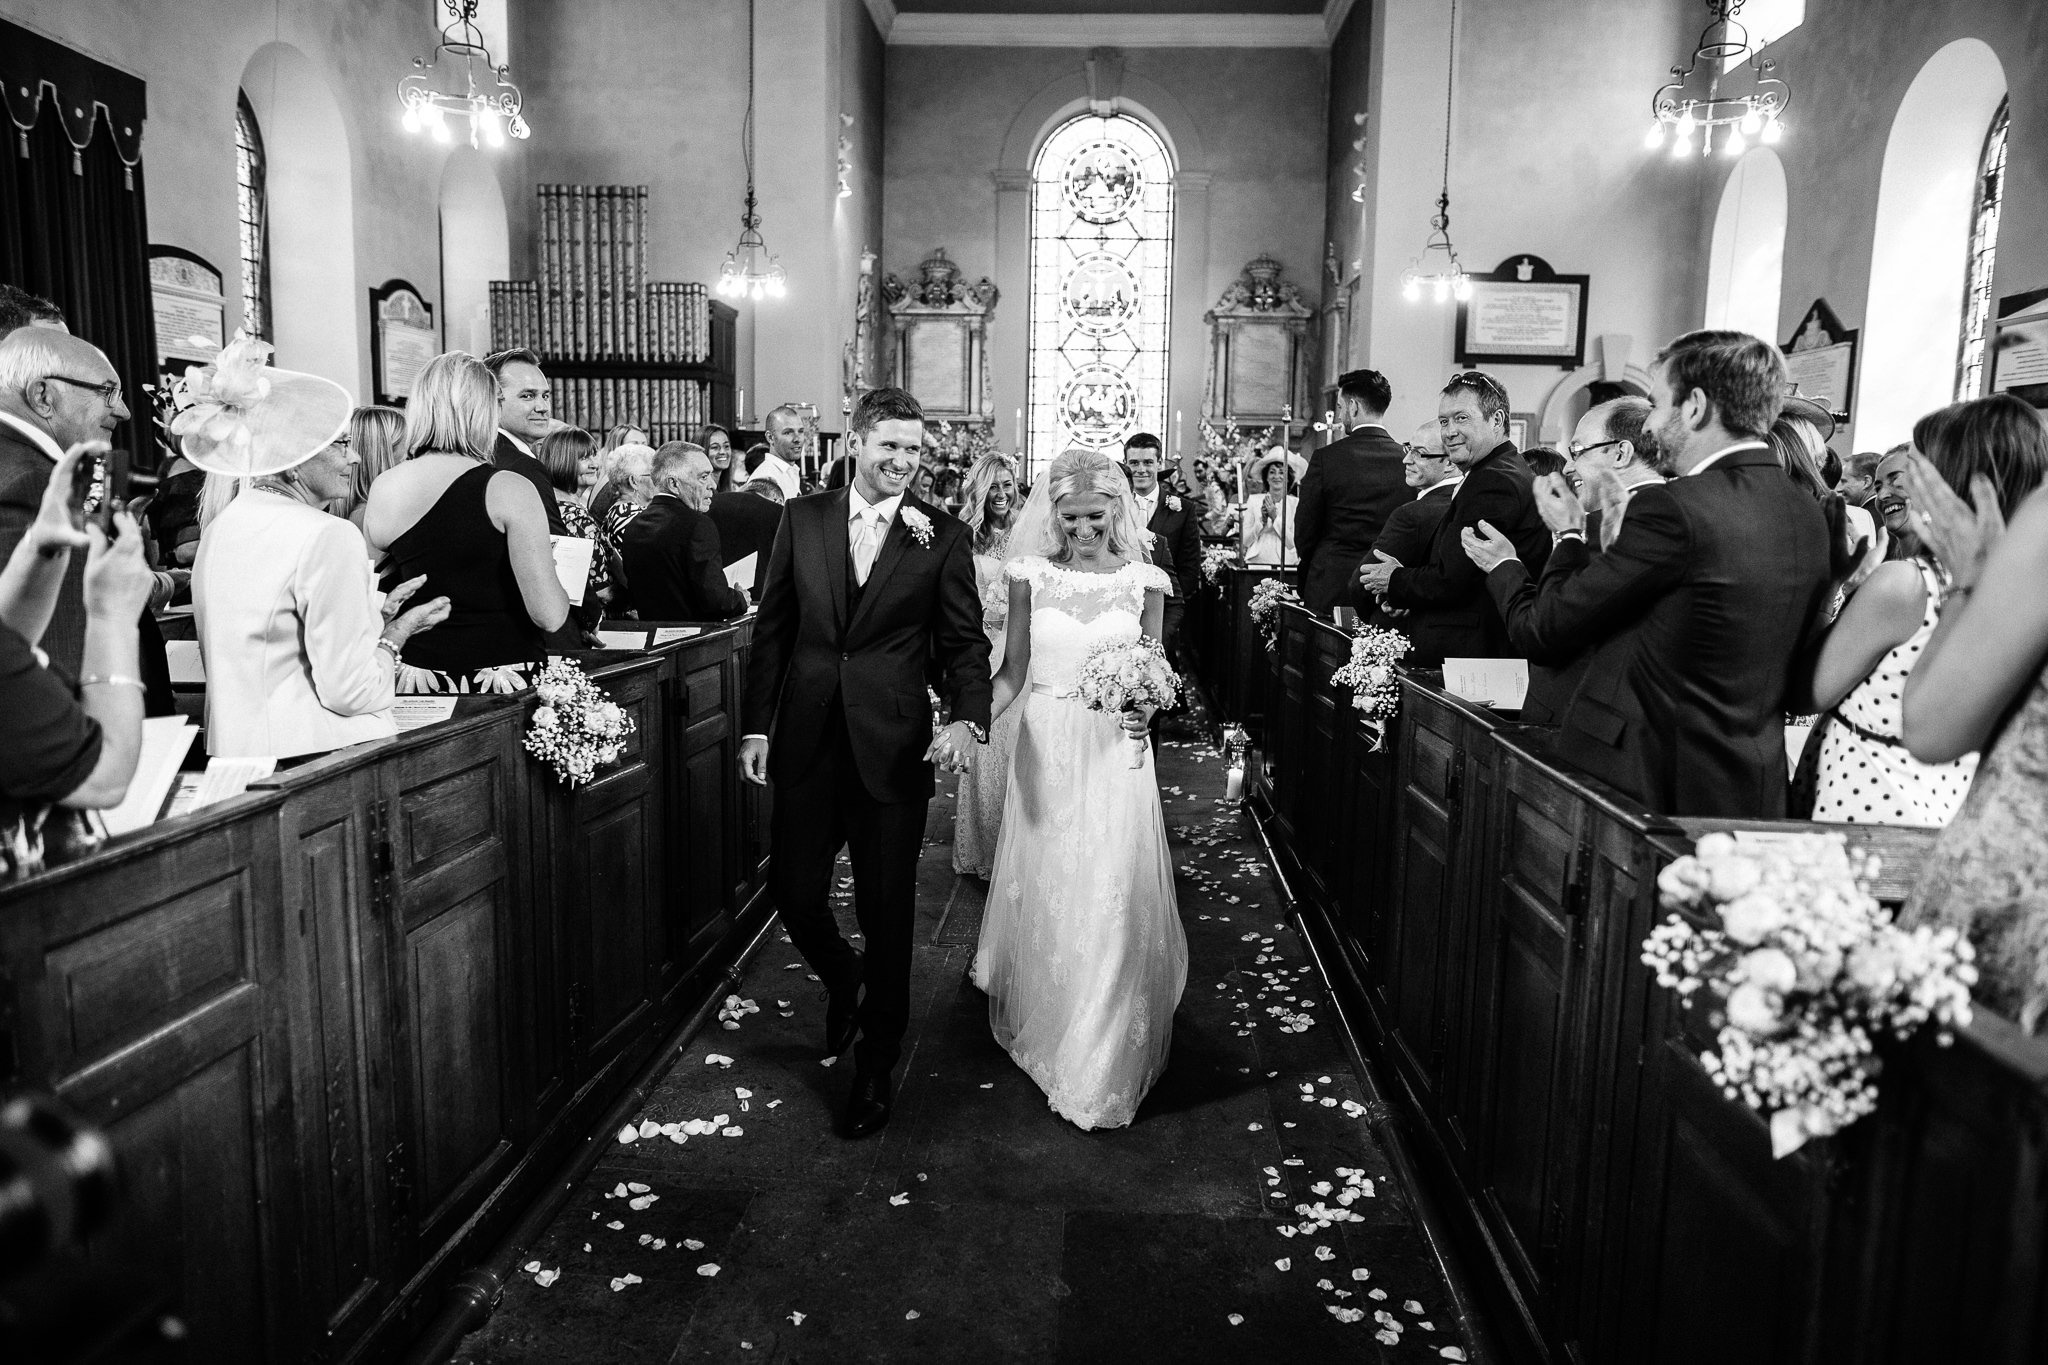  Bride and Groom walk down the aisle after being married at at St Michael's Church Aynho, Banbury OX17 3BQ 